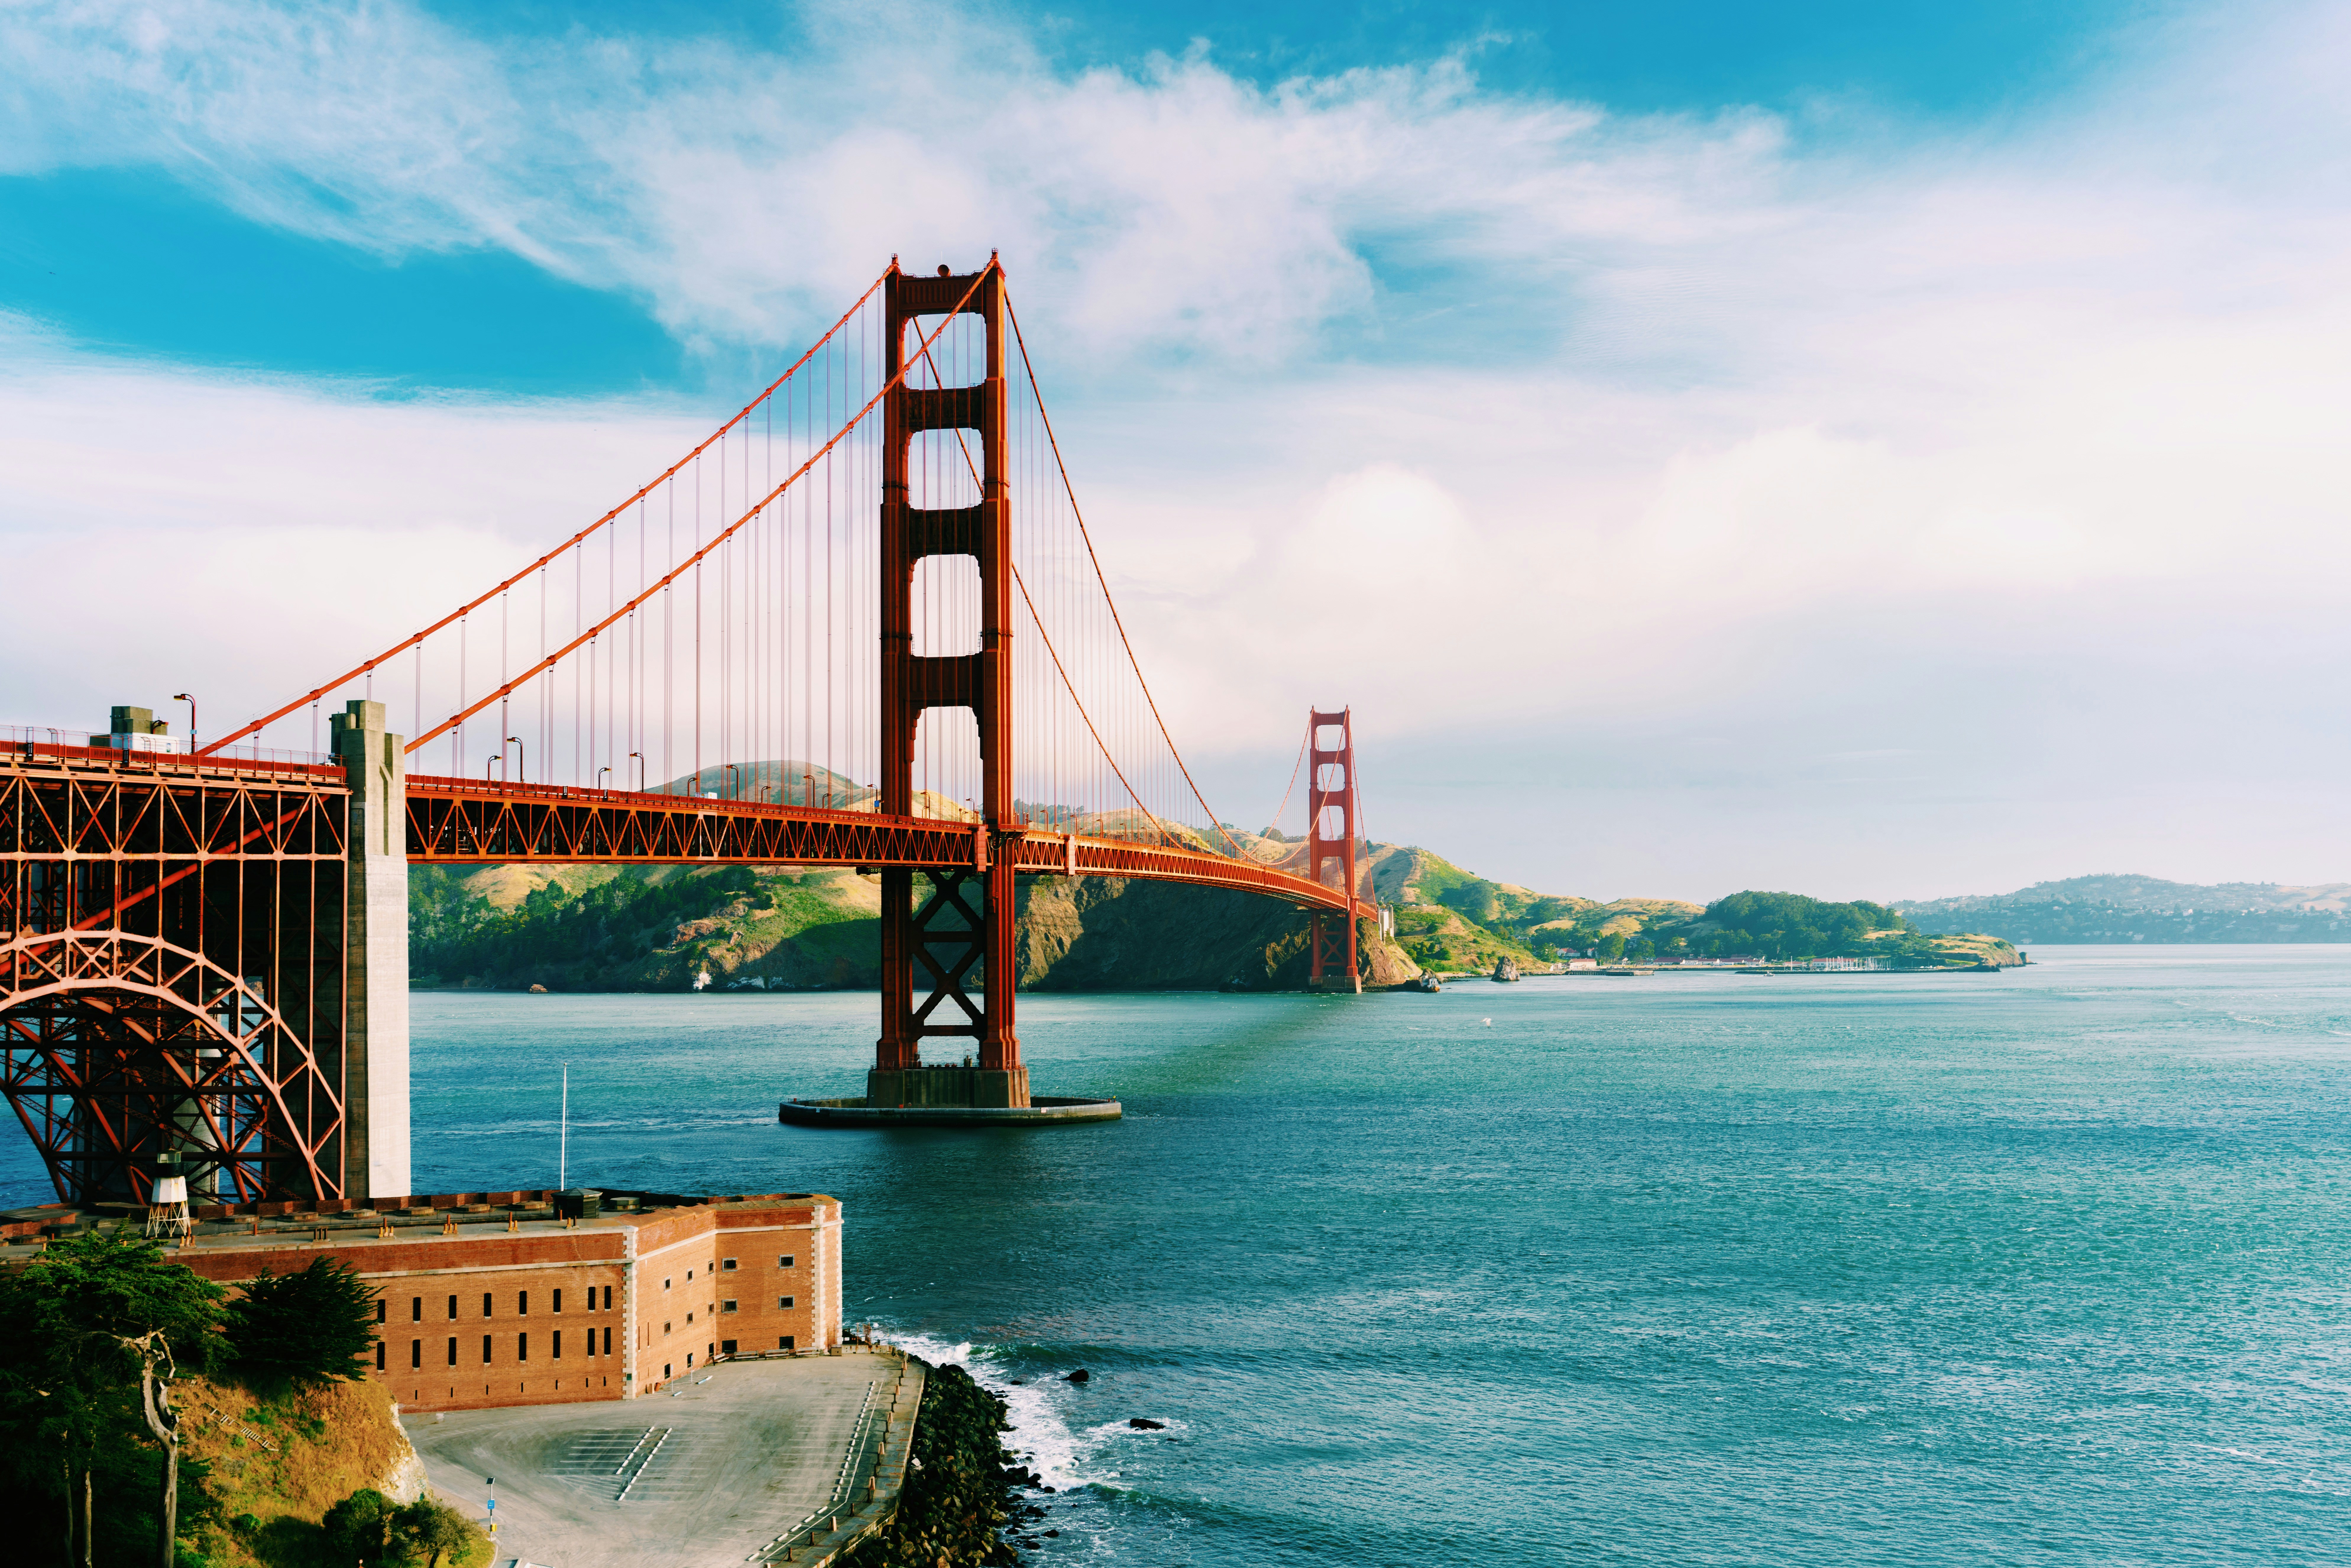 San Francisco is one of the best places to live in California because of its job market and warm weather. Pictured: A view of the Golden Gate Bridge in San Francisco